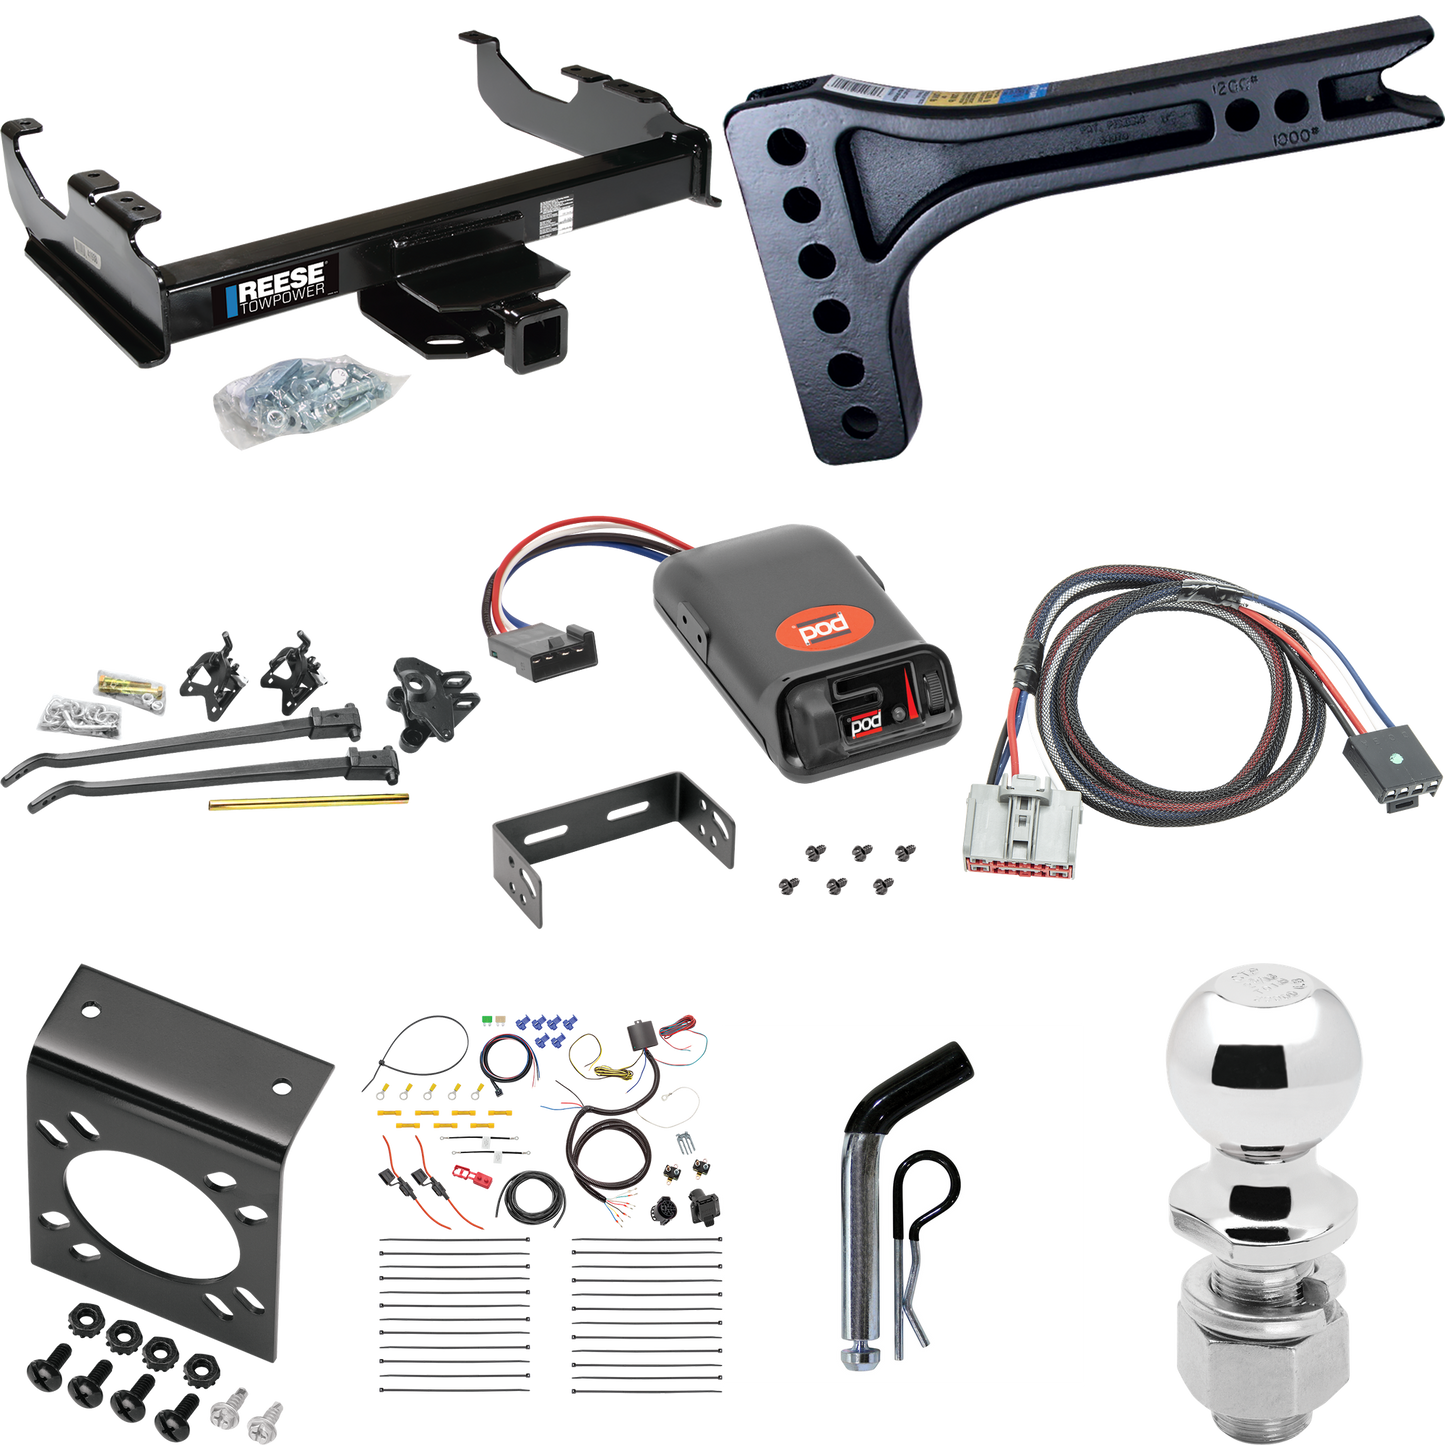 Fits 2020-2019 Chevrolet Silverado 3500 HD Trailer Hitch Tow PKG w/ 15K Trunnion Bar Weight Distribution Hitch + Pin/Clip + 2-5/16" Ball + Pro Series POD Brake Control + Plug & Play BC Adapter + 7-Way RV Wiring (For Cab & Chassis, w/34" Wide Frames M